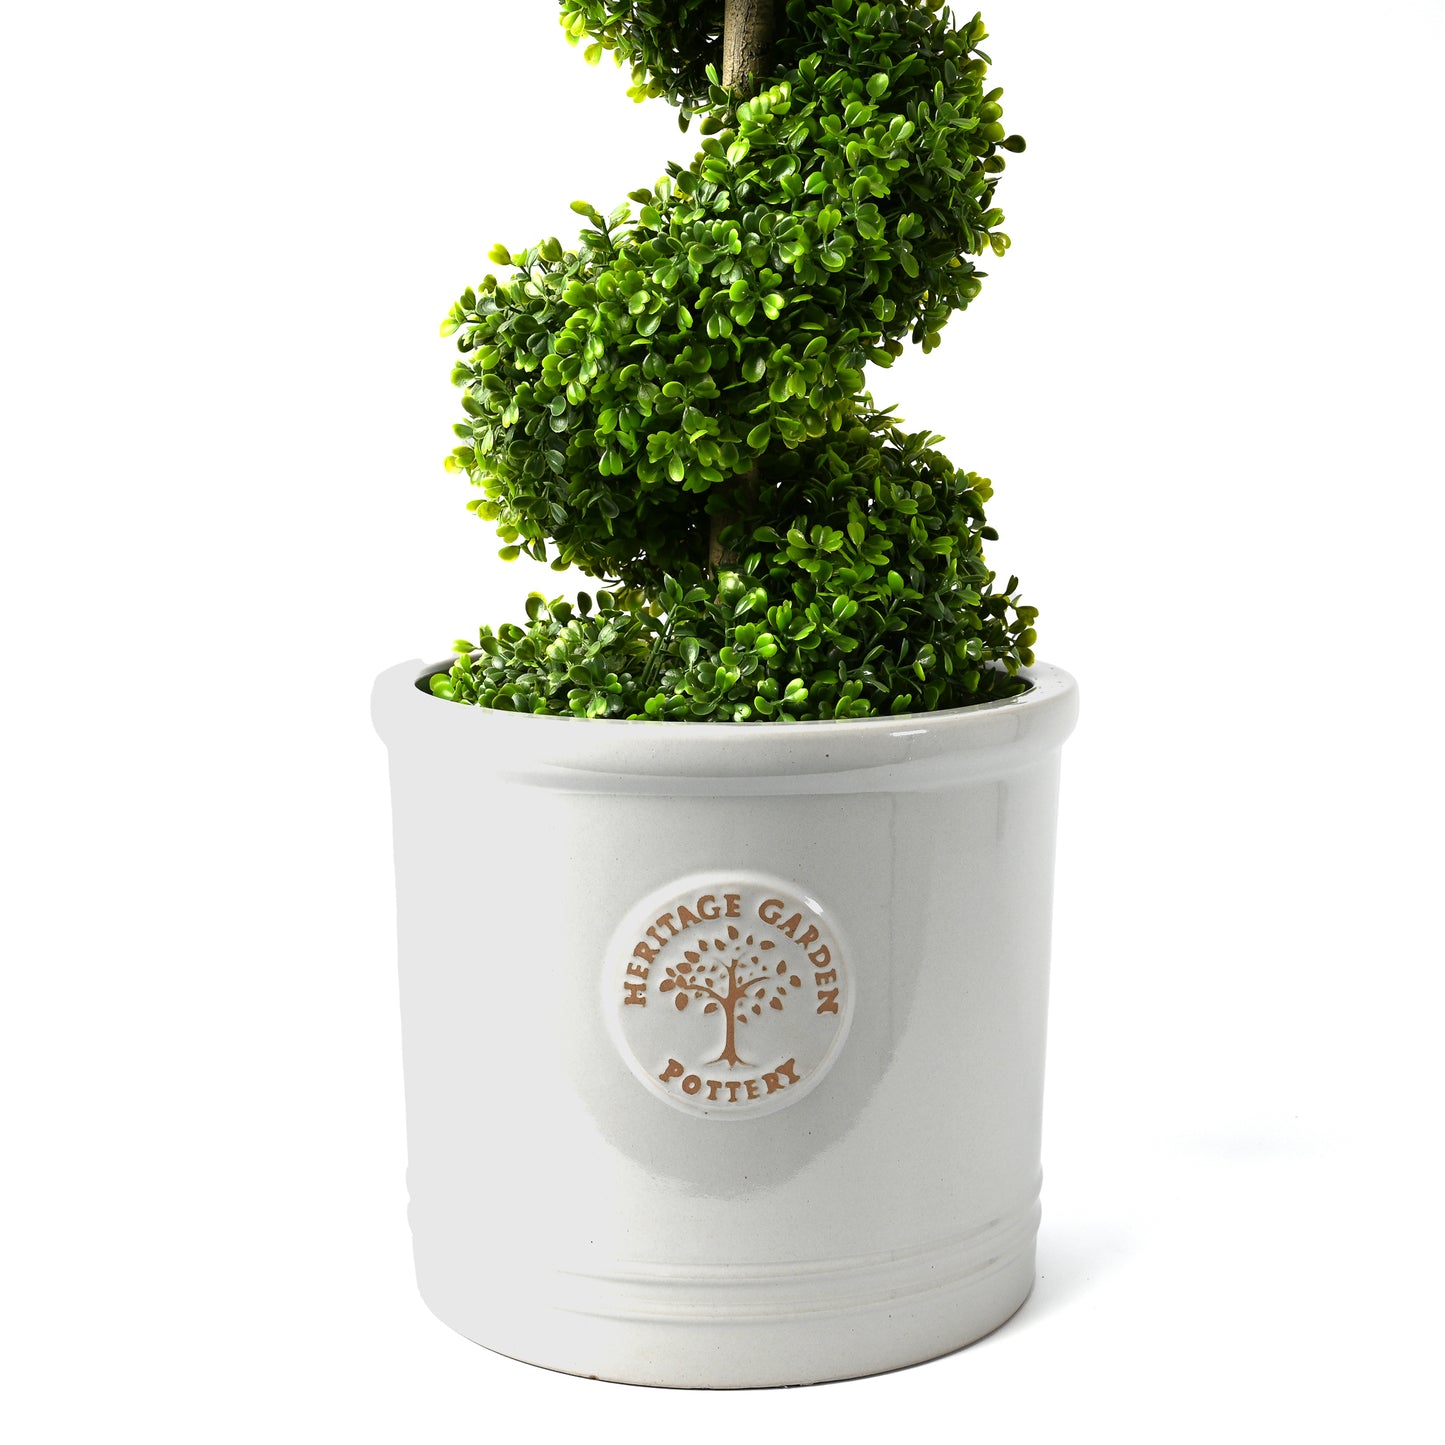 Large modern garden pot with topiary